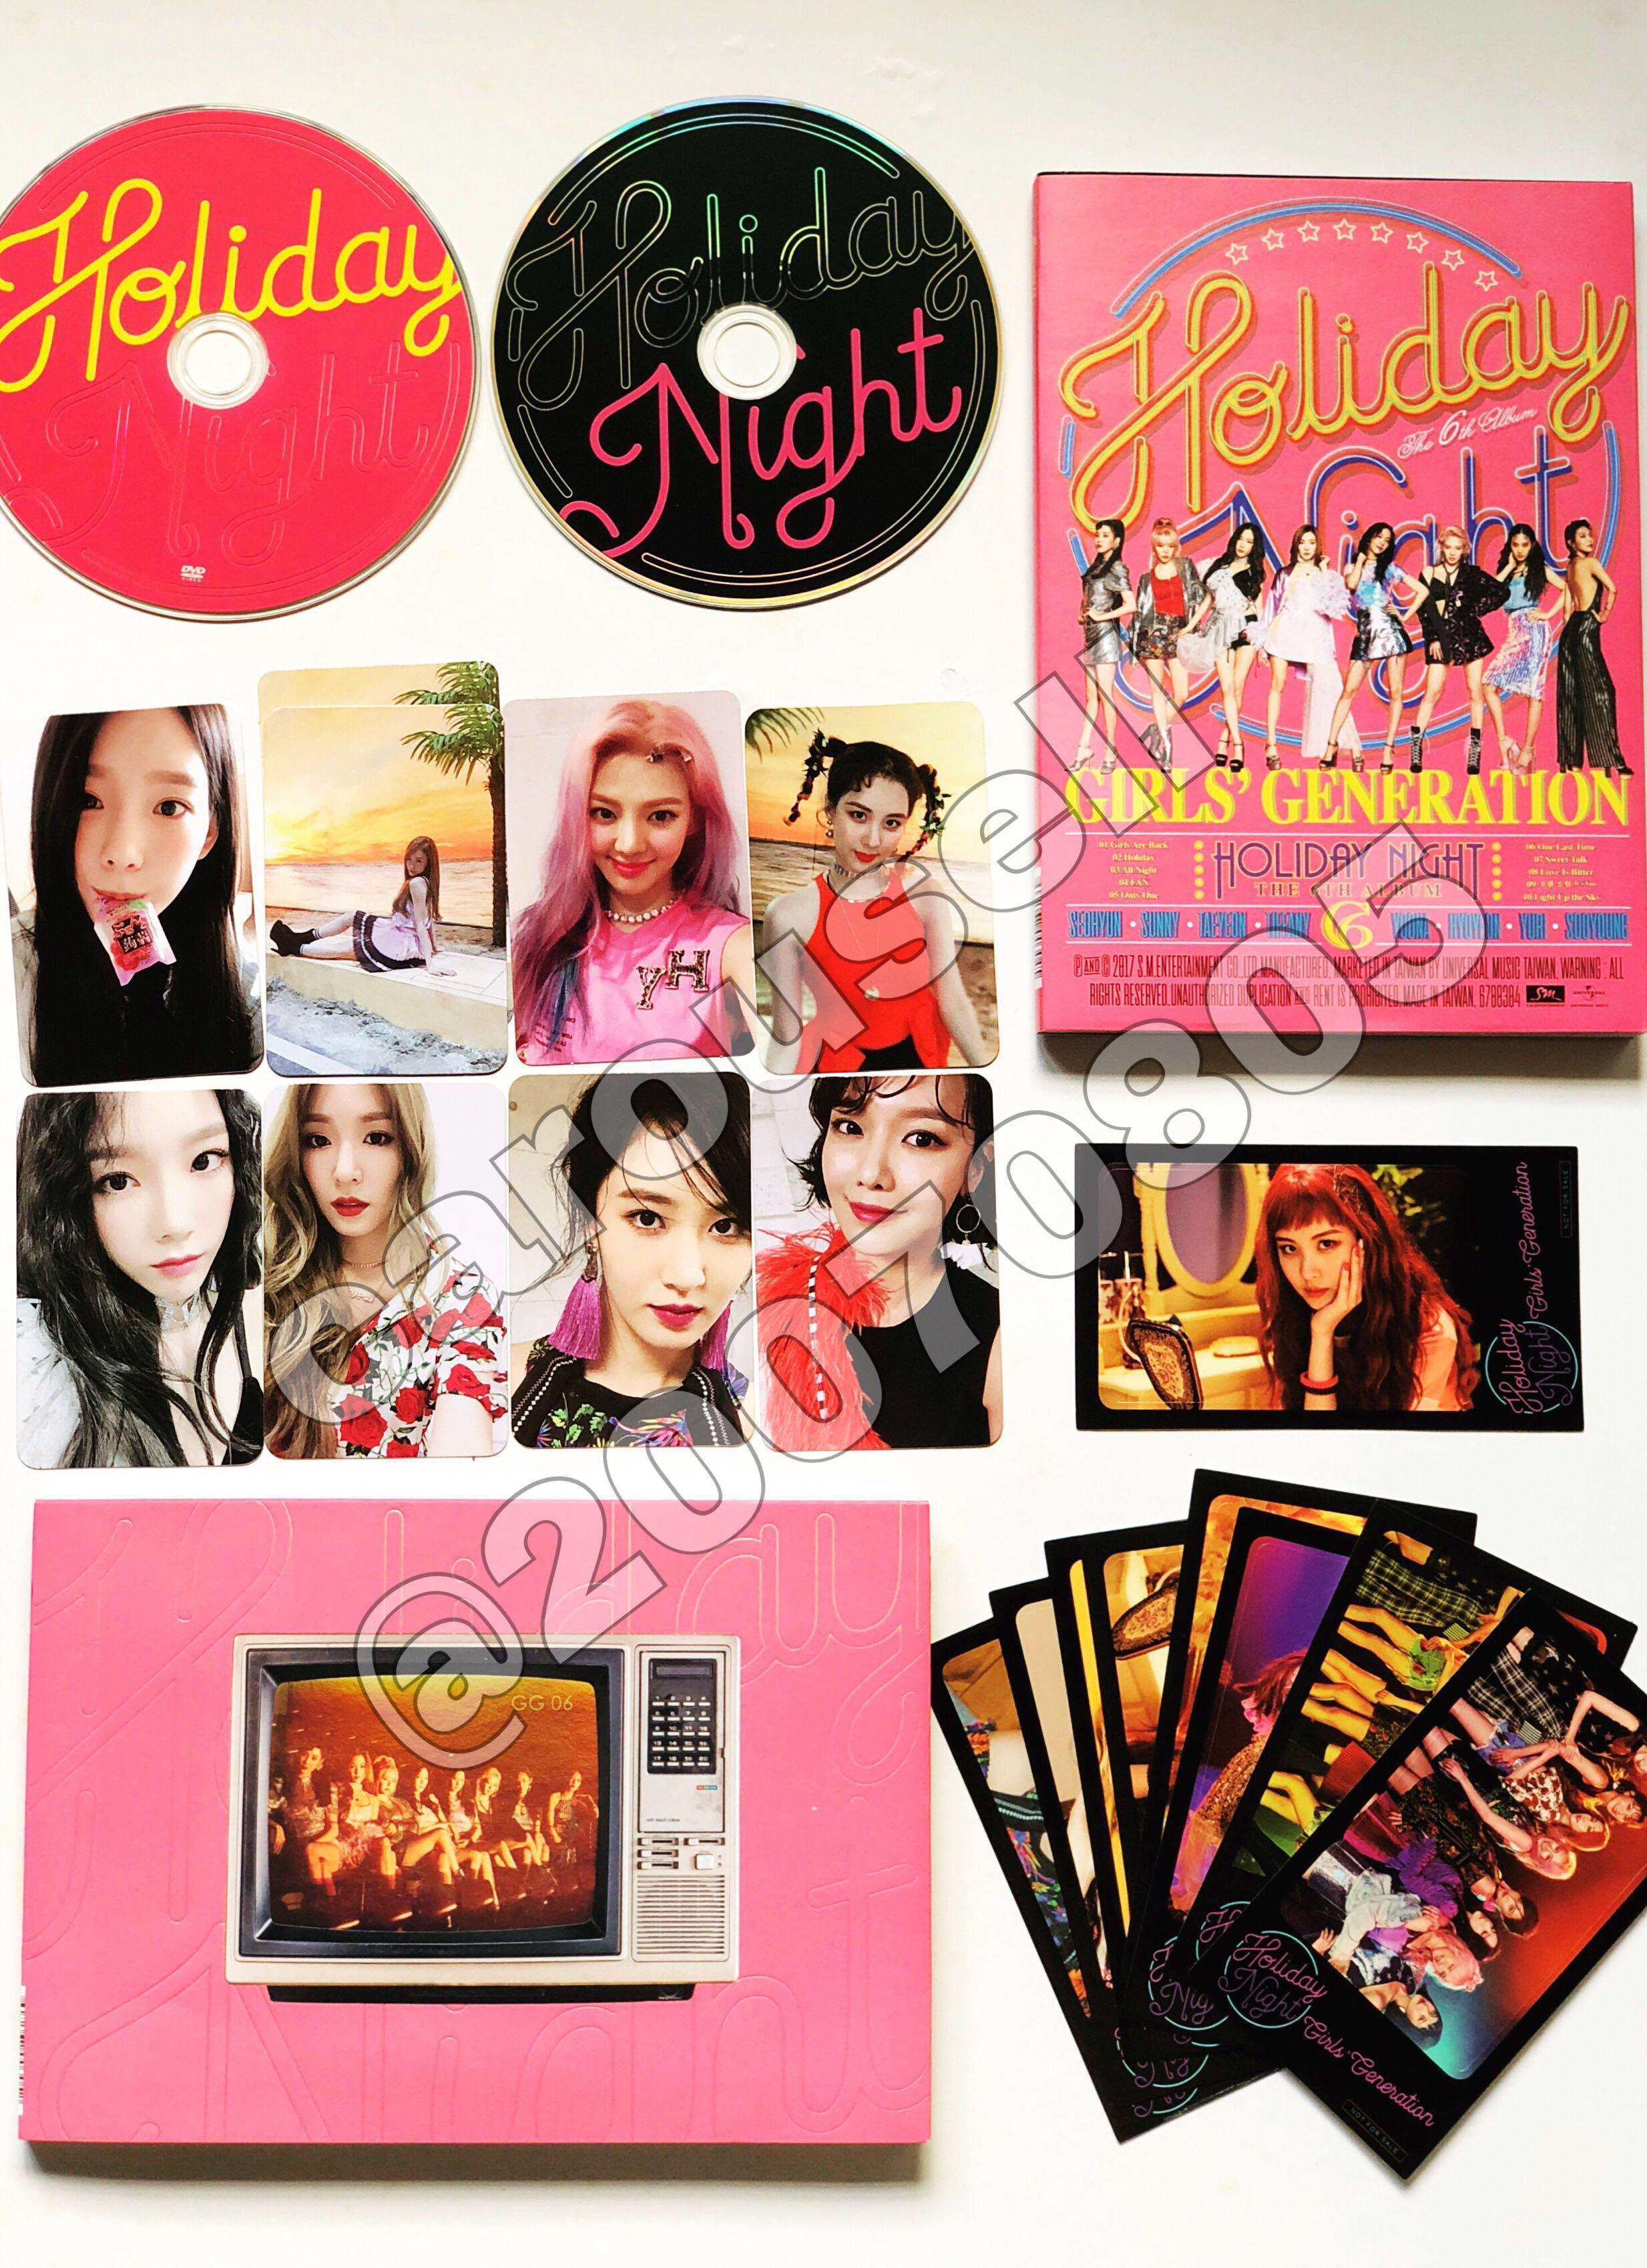 Clearance Snsd Girls Generation Holiday Night Taiwan Album Cd Dvd Hobbies Toys Memorabilia Collectibles K Wave On Carousell